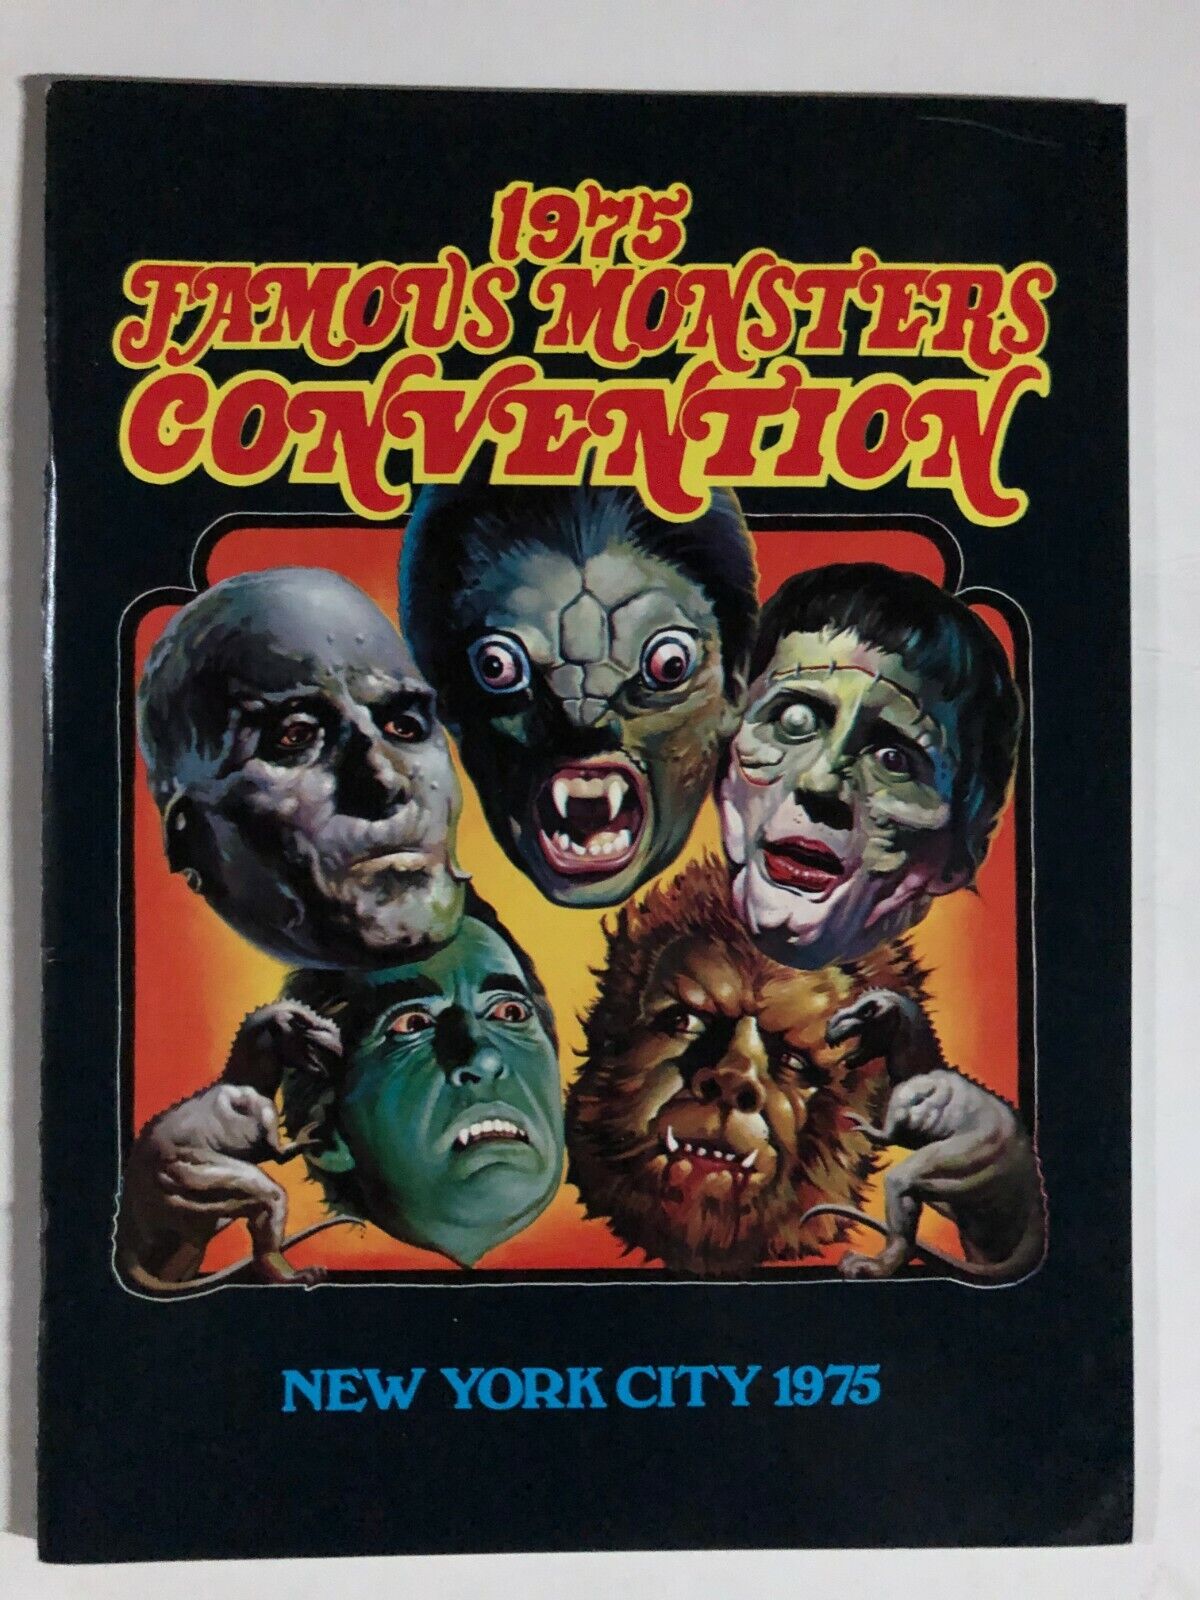 FAMOUS MONSTERS 1975 CONVENTION BOOK - NYC VF-NM BC signed by Barbara Leigh